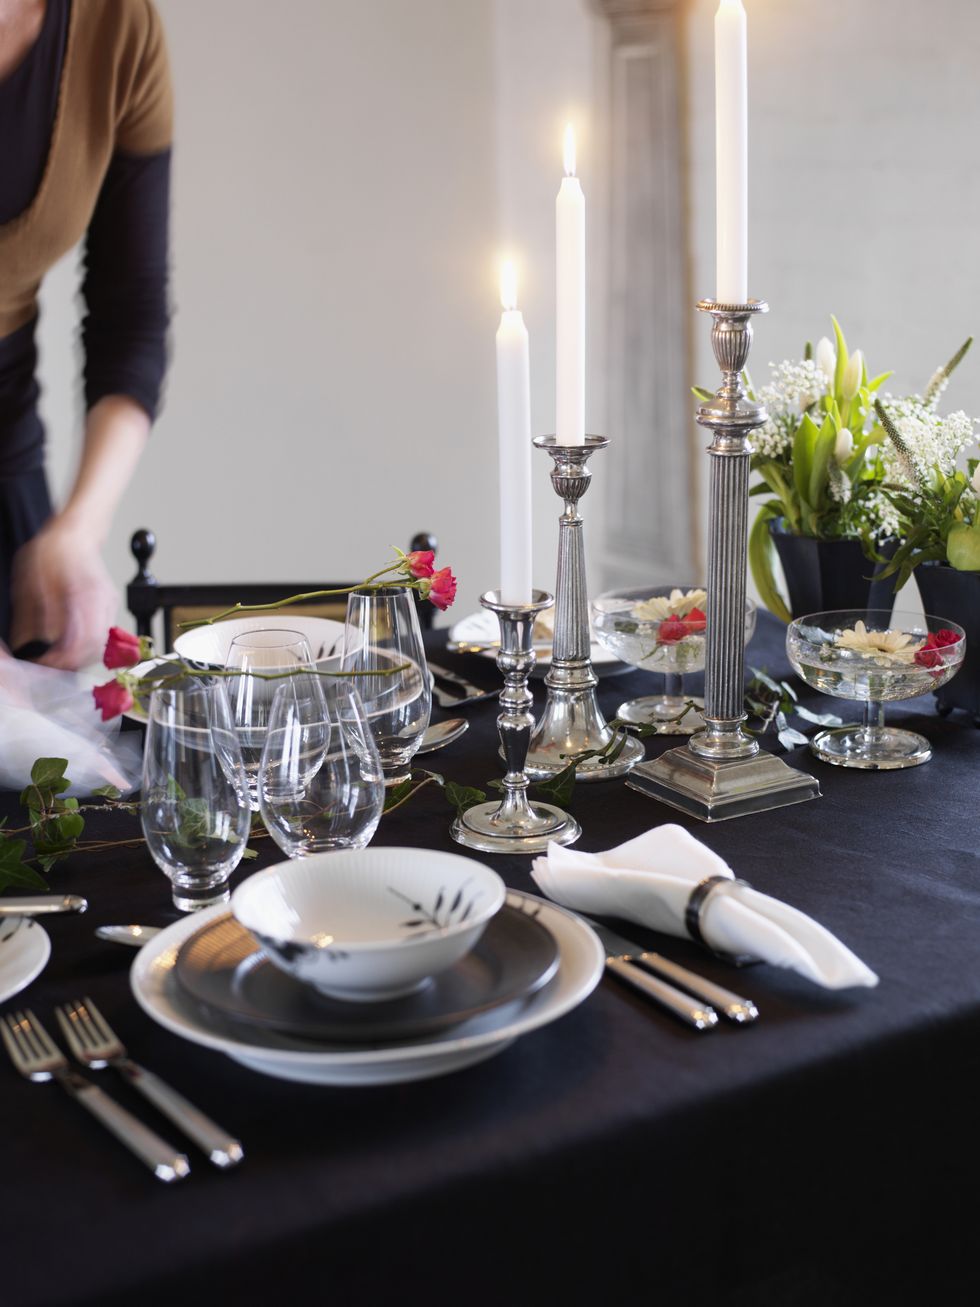 Dining table arrangement by woman